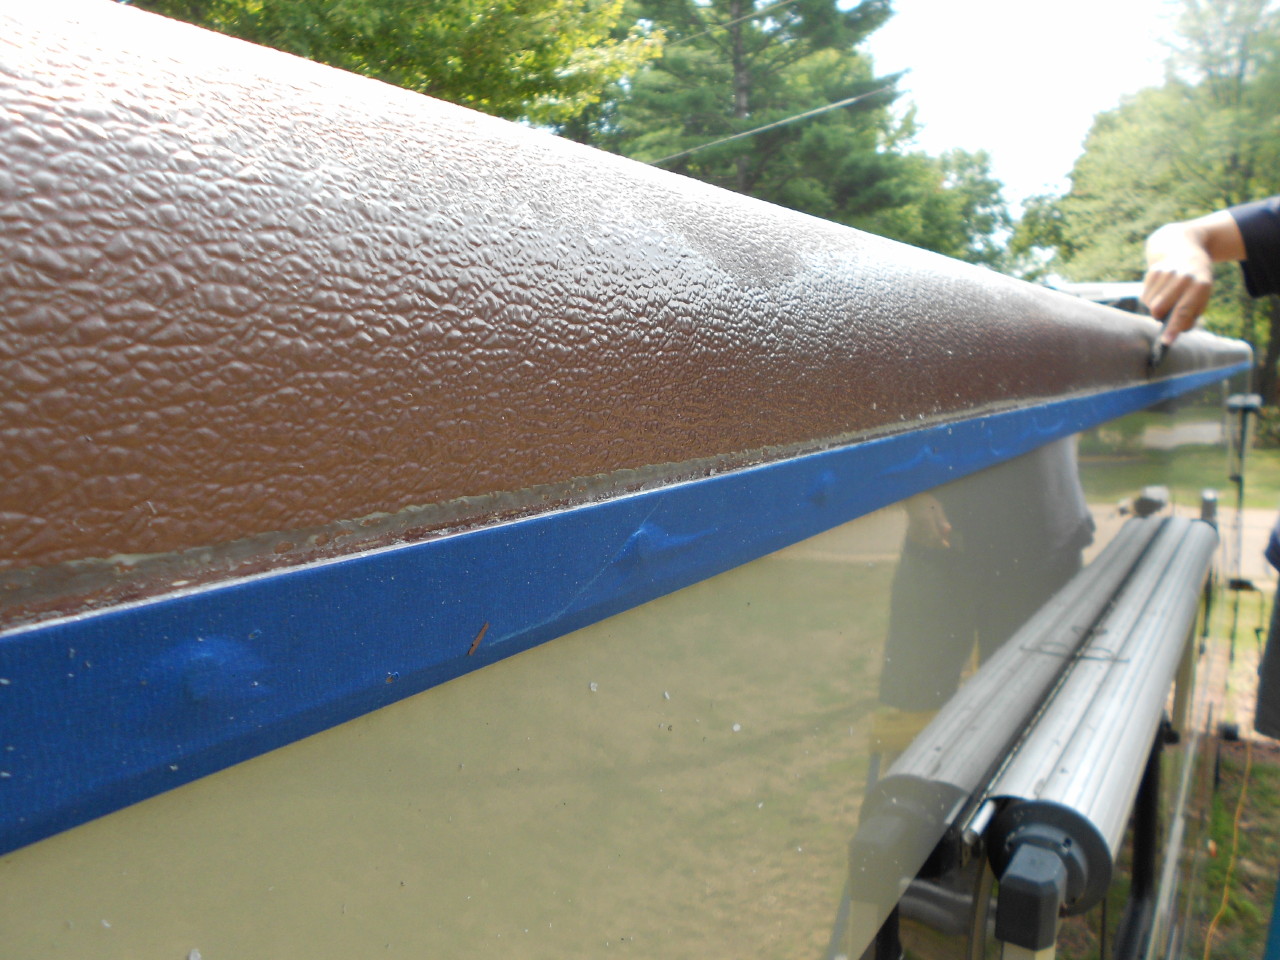 What A View!!! : Coating Mel and Paula's RV Roof with Elastomeric Paint